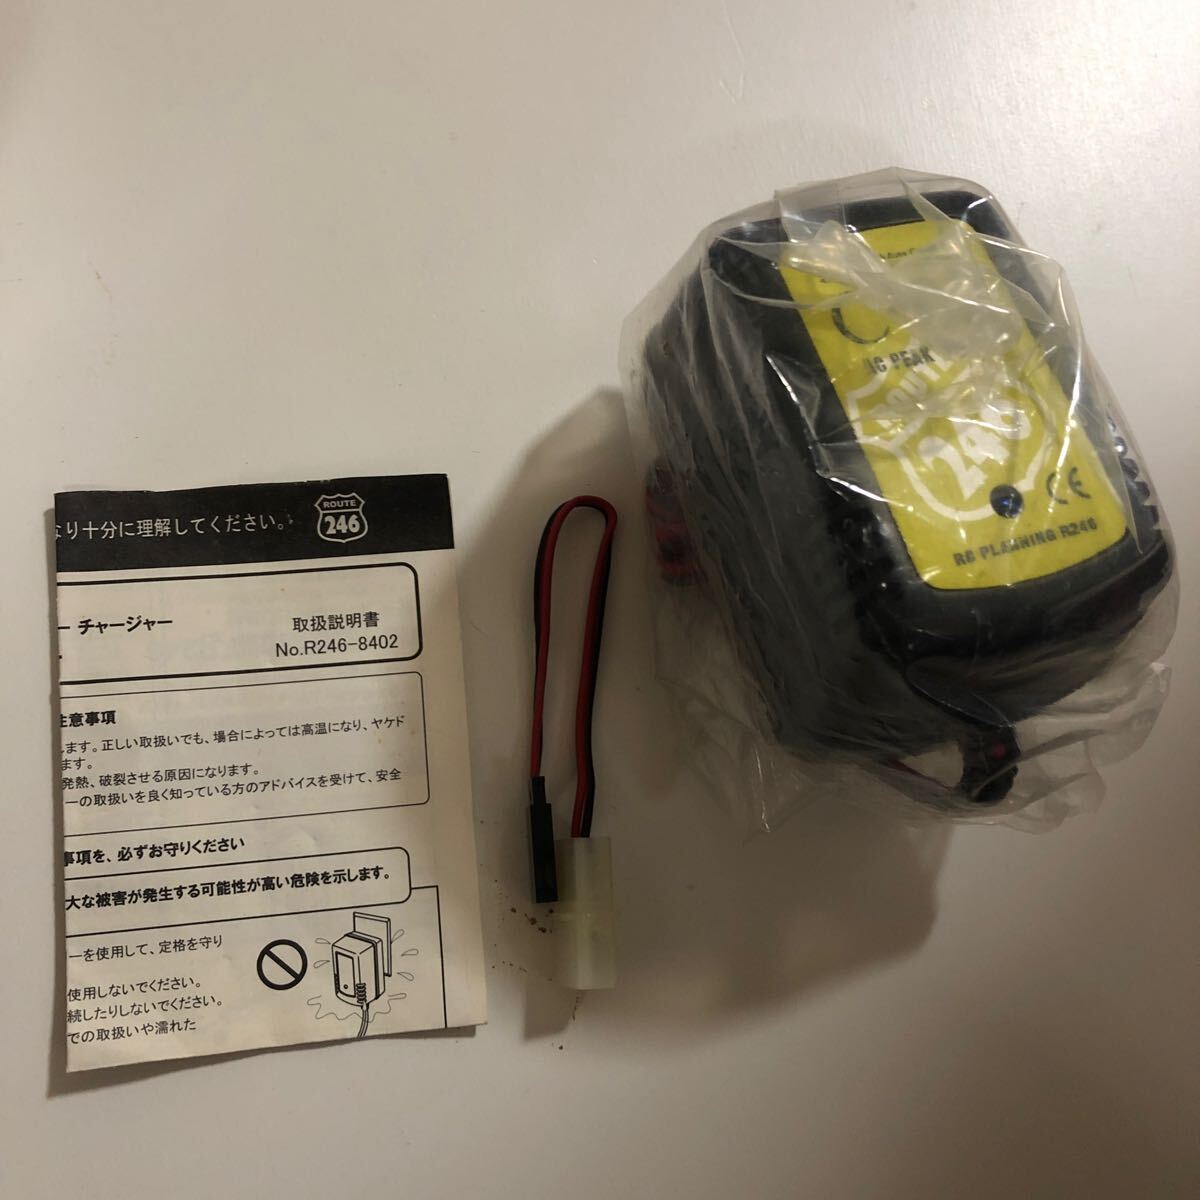 No. [ new goods * unopened | Kyosho | radio-controller ]C -02 ACpi-k charger 